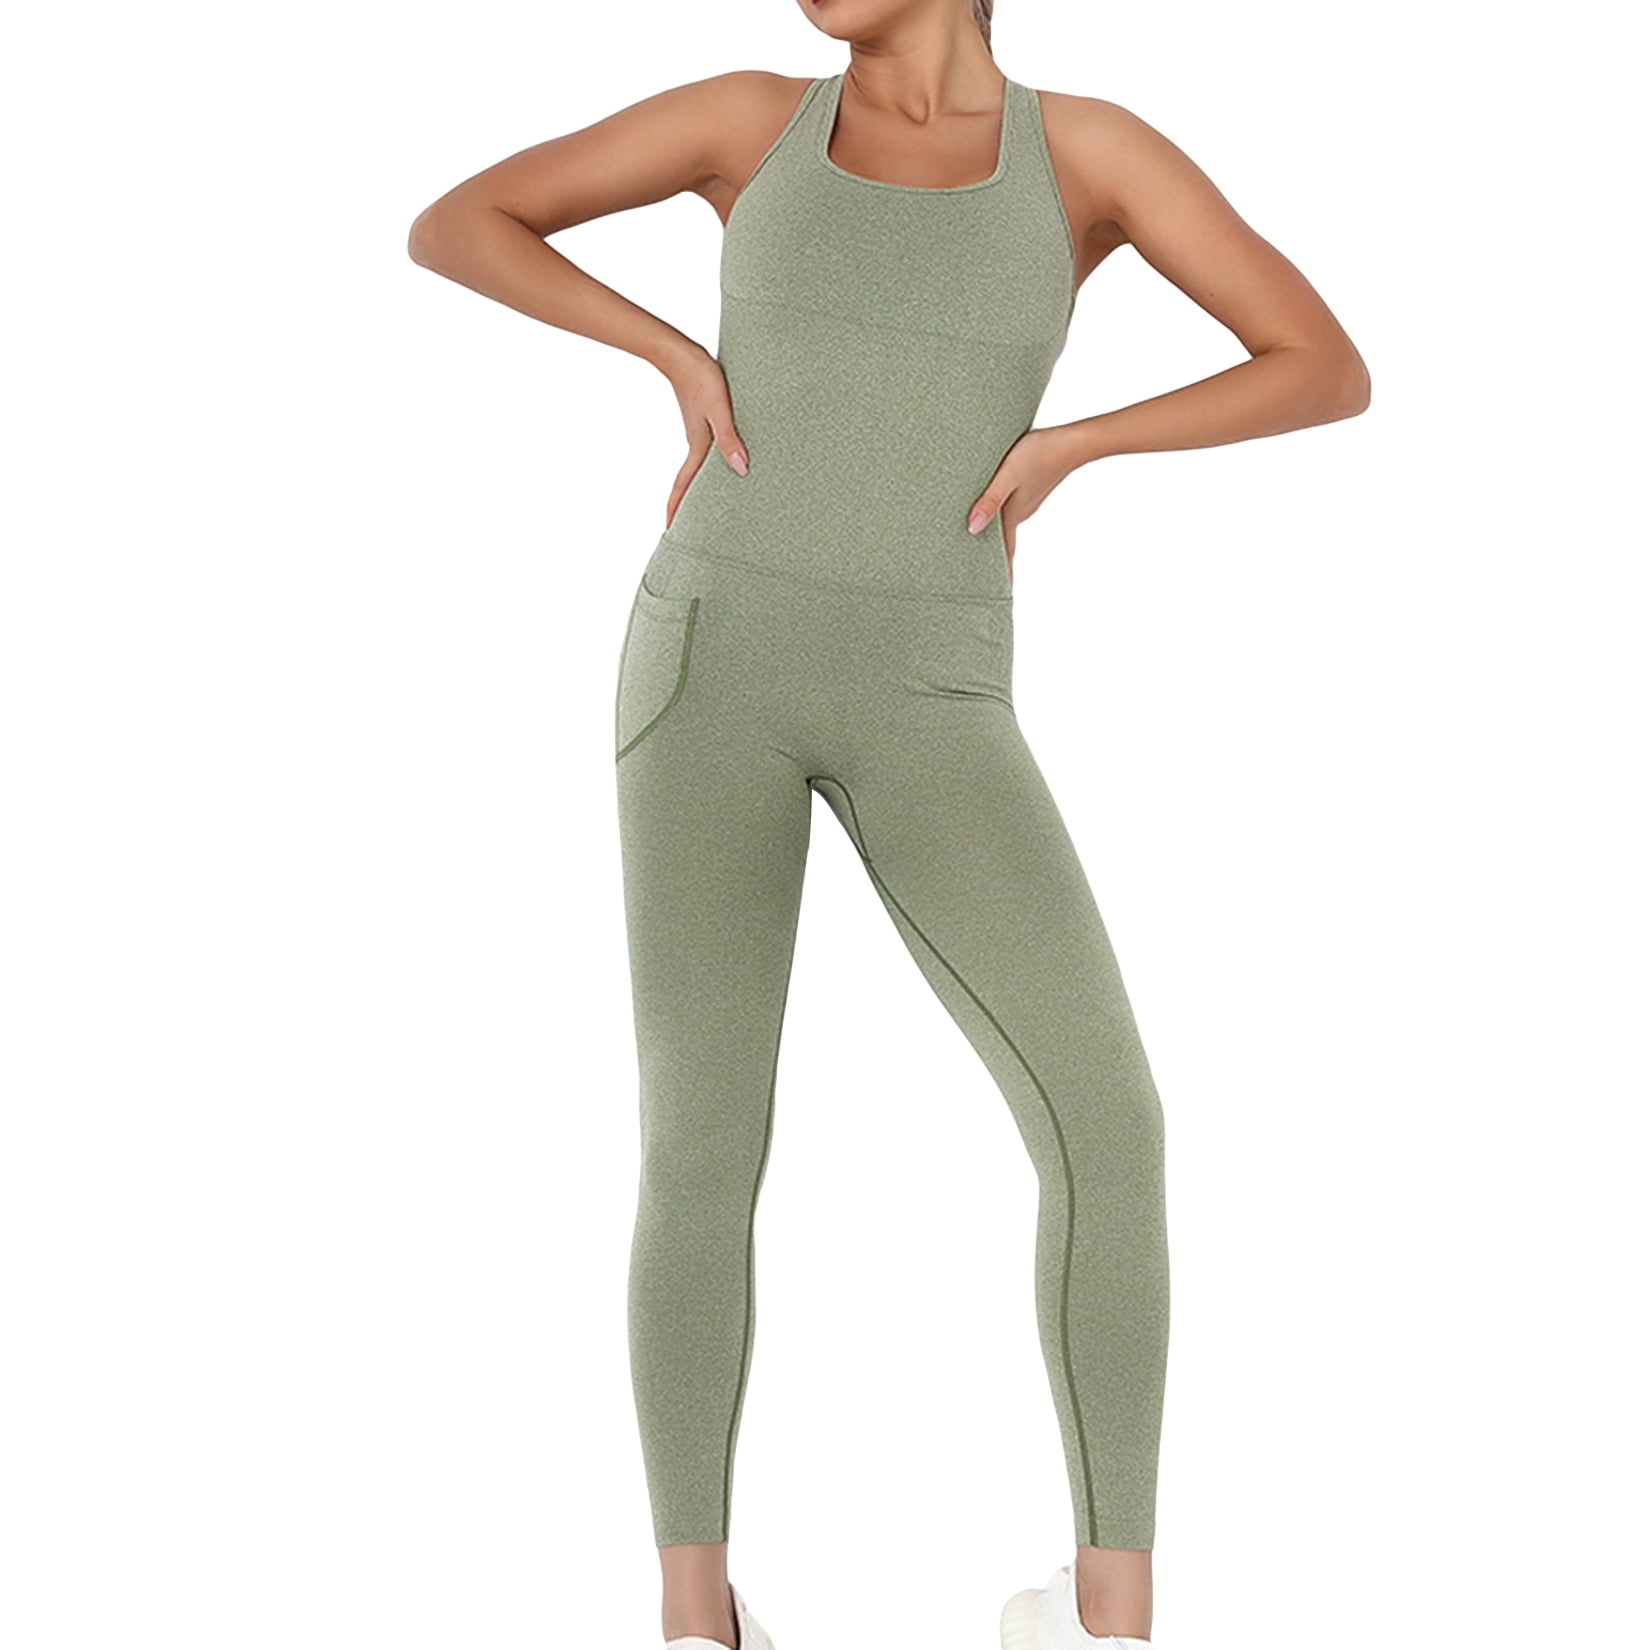 Lu's Chic Women's One Piece Outfit Onesie Jumpsuit Pant Slim Fit Romper  Cozy Fitted Spring Legging Army Green Large 